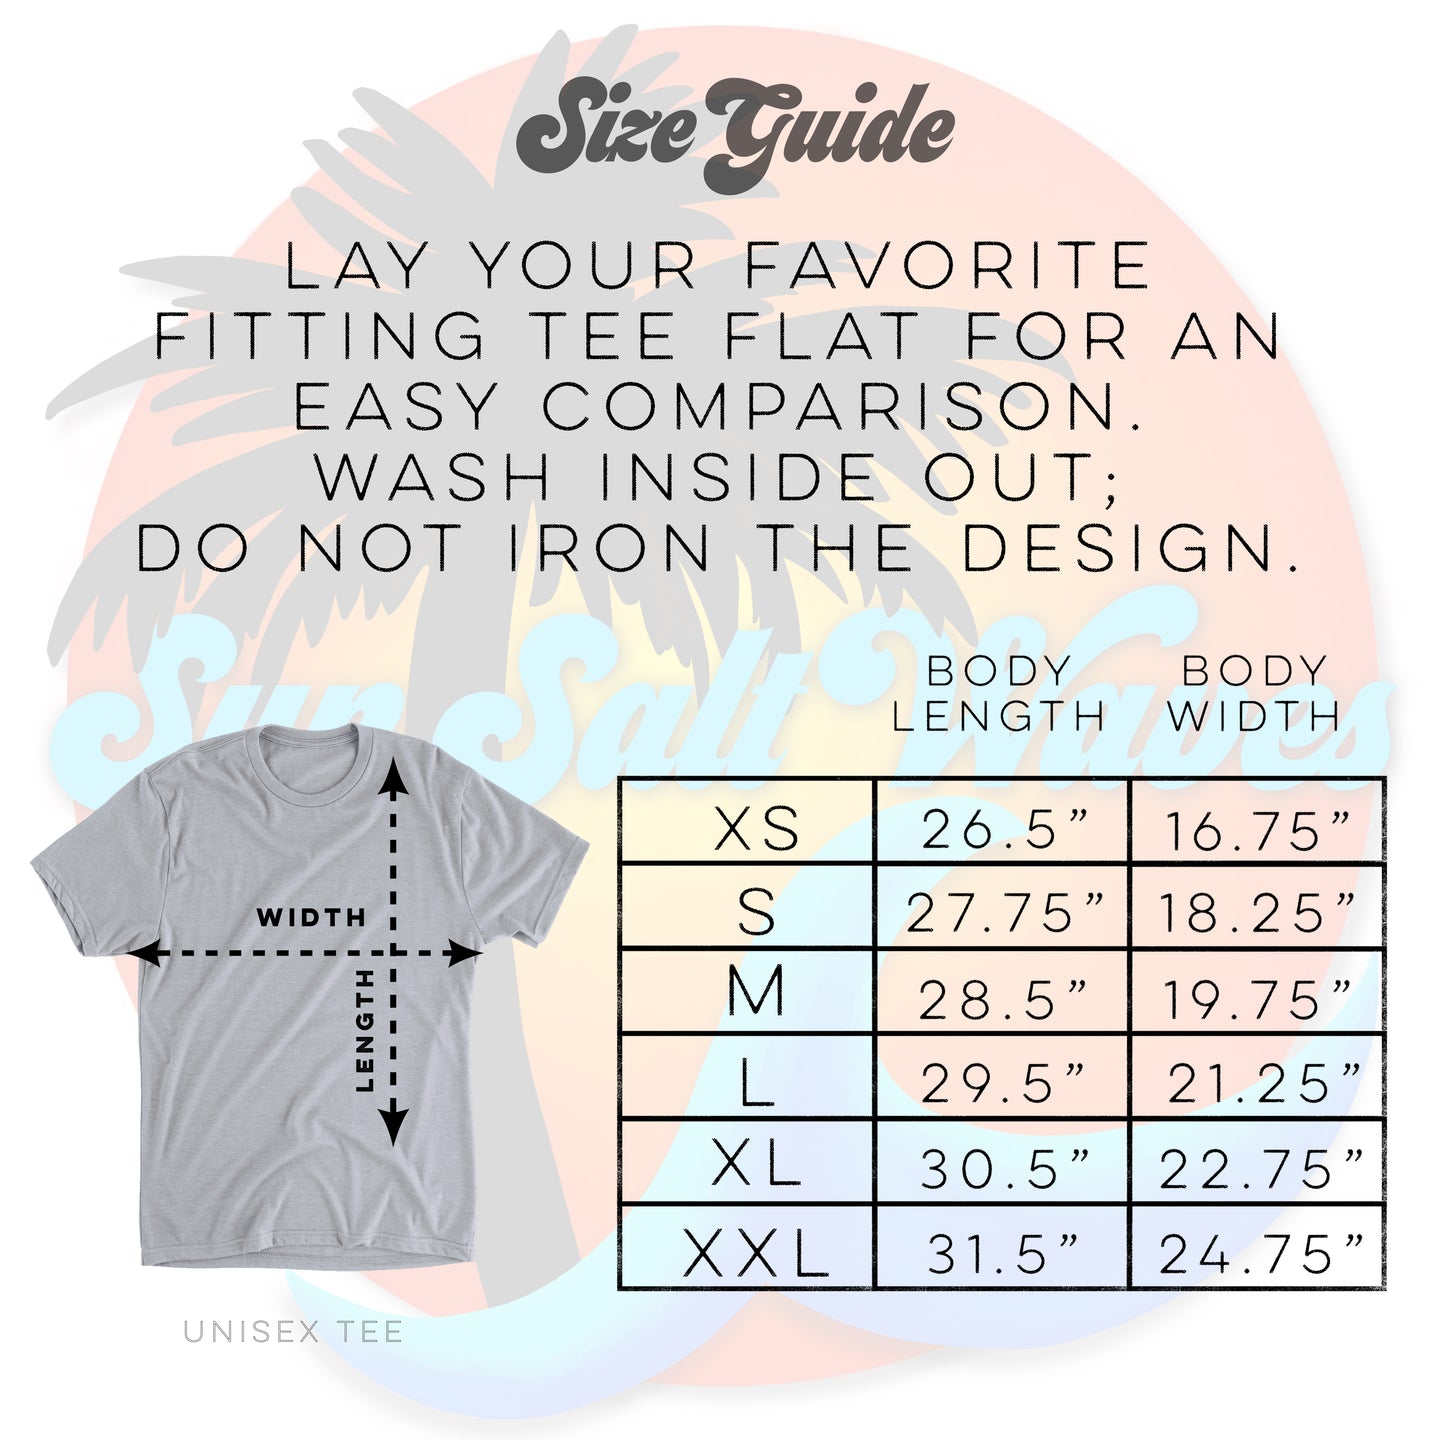 Size guide and washing instructions